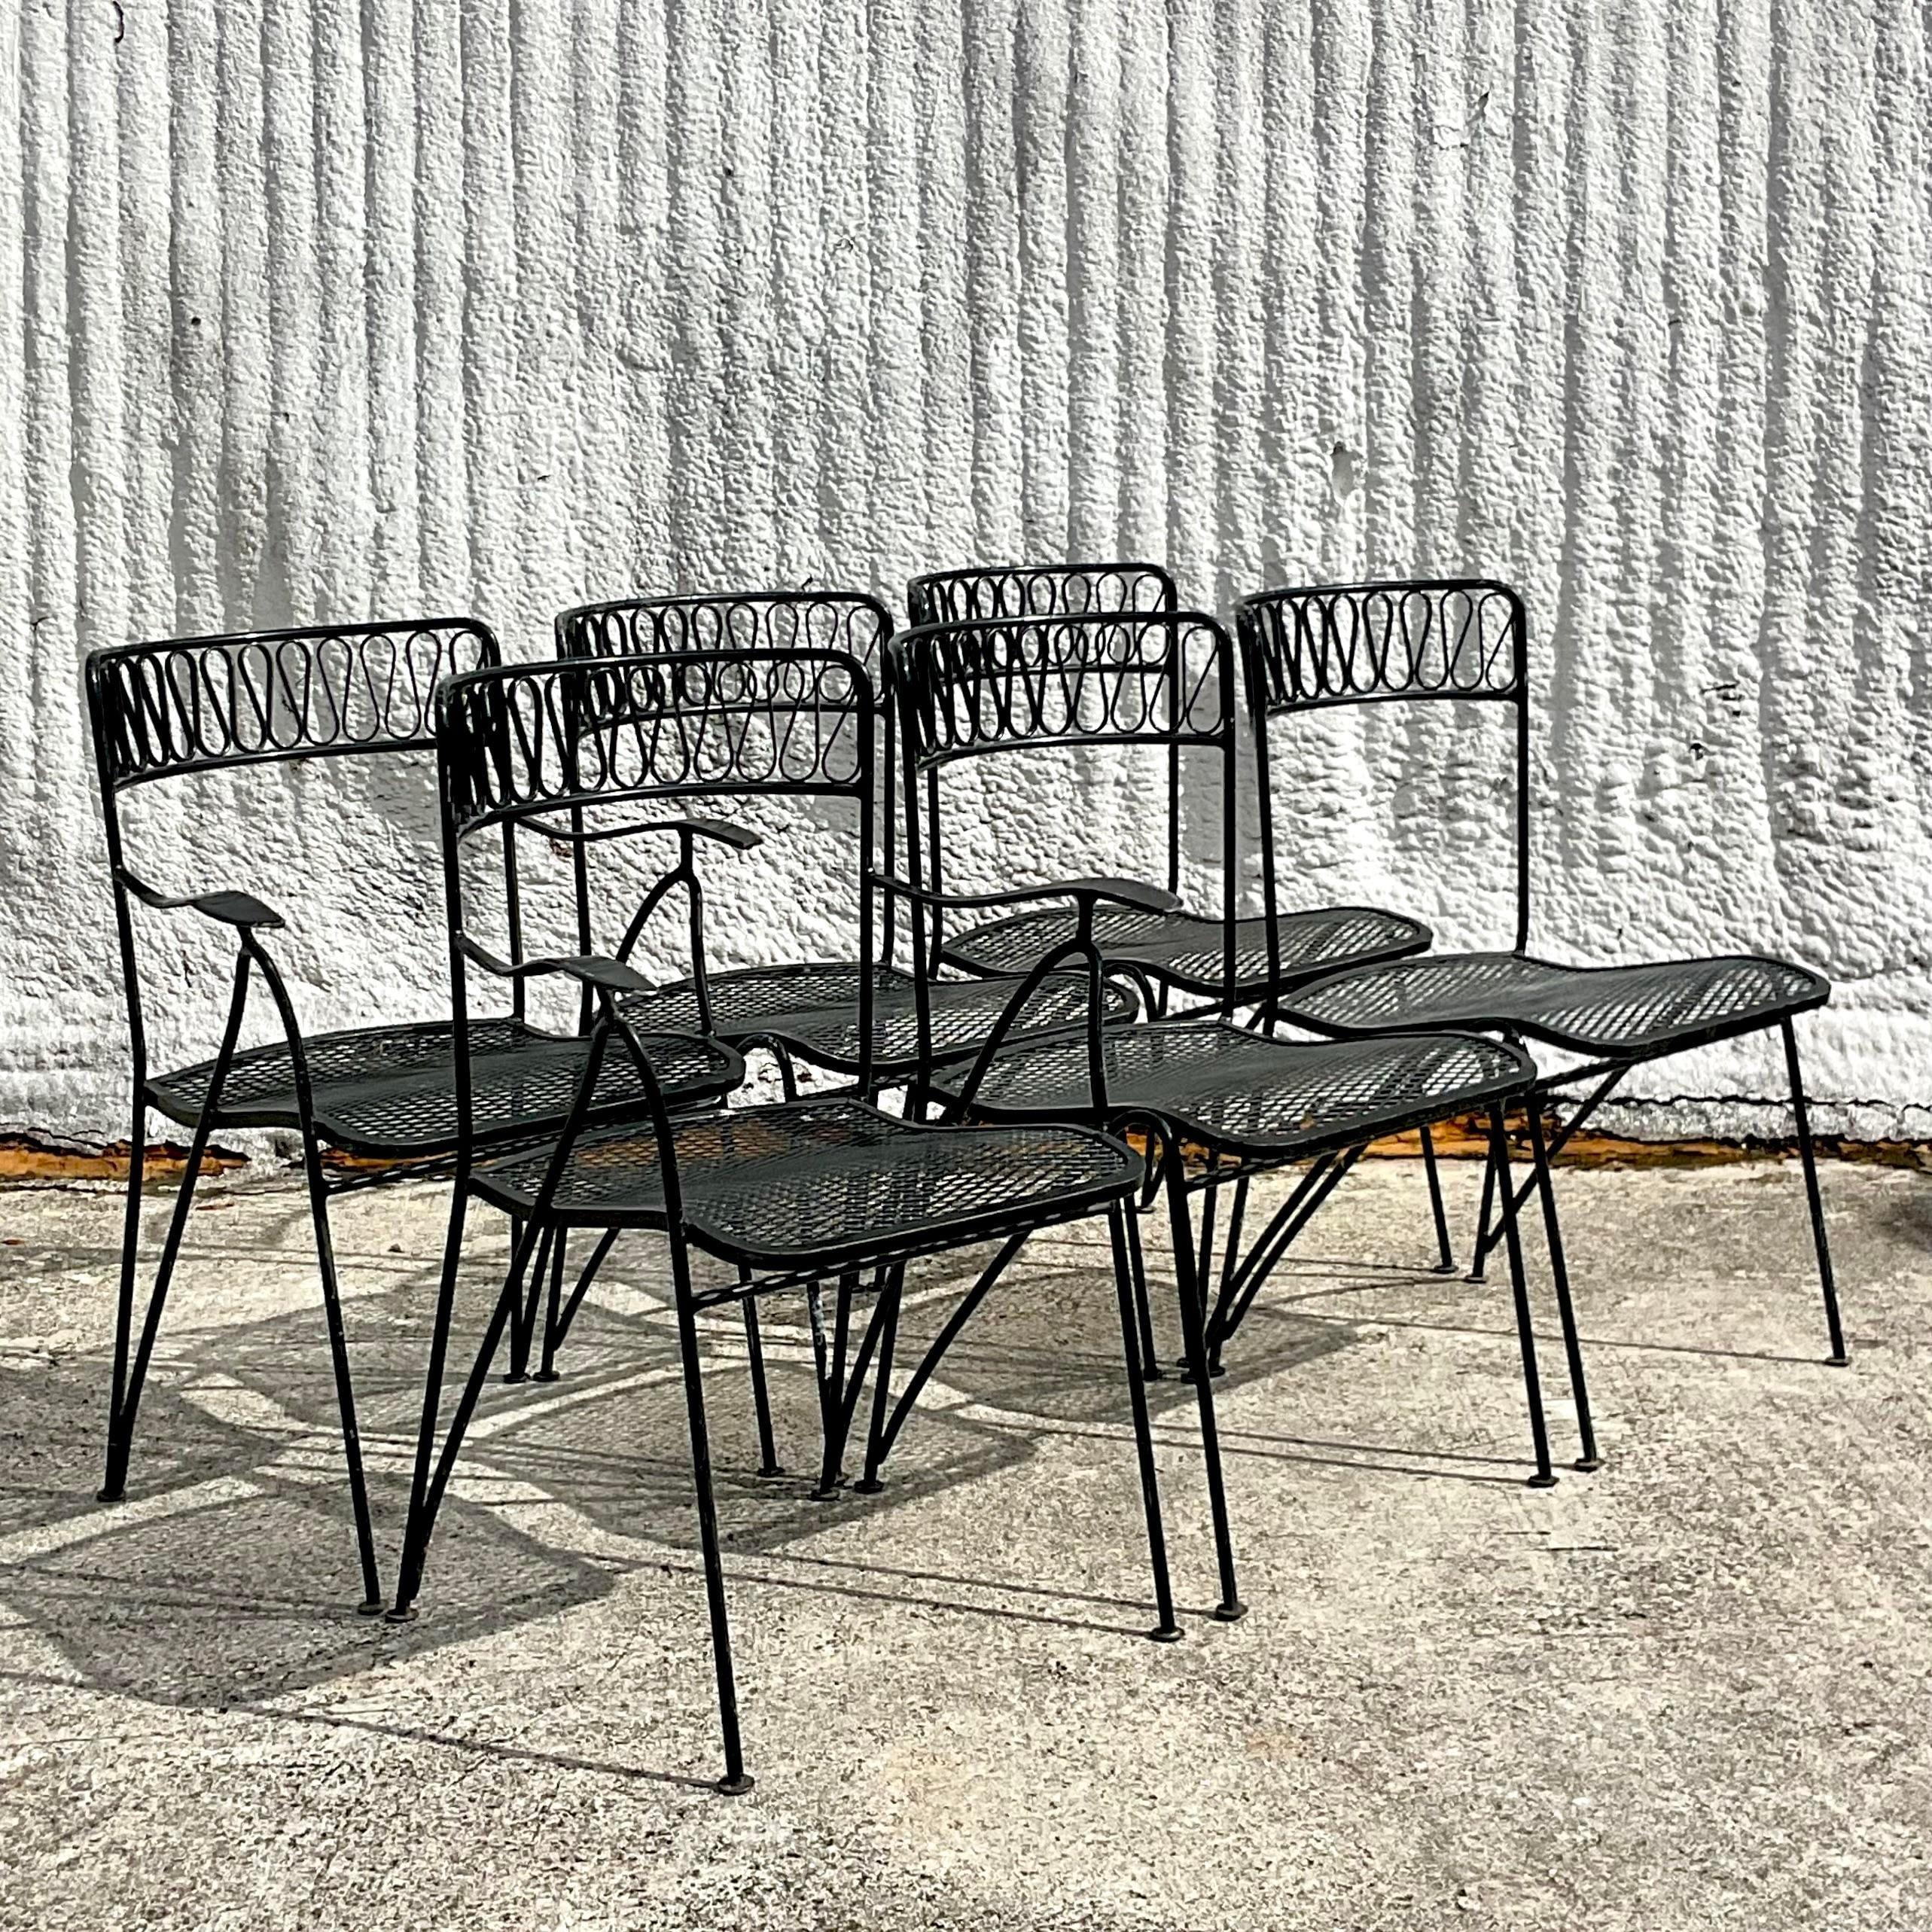 A fabulous vintage MCM outdoor dining table. Made by the iconic Salterini group. Unmarked. The coveted ribbon design in a classic round shape. 47 inch round glass top, but easily can take a larger piece of glass if needed. Coordinating chairs also